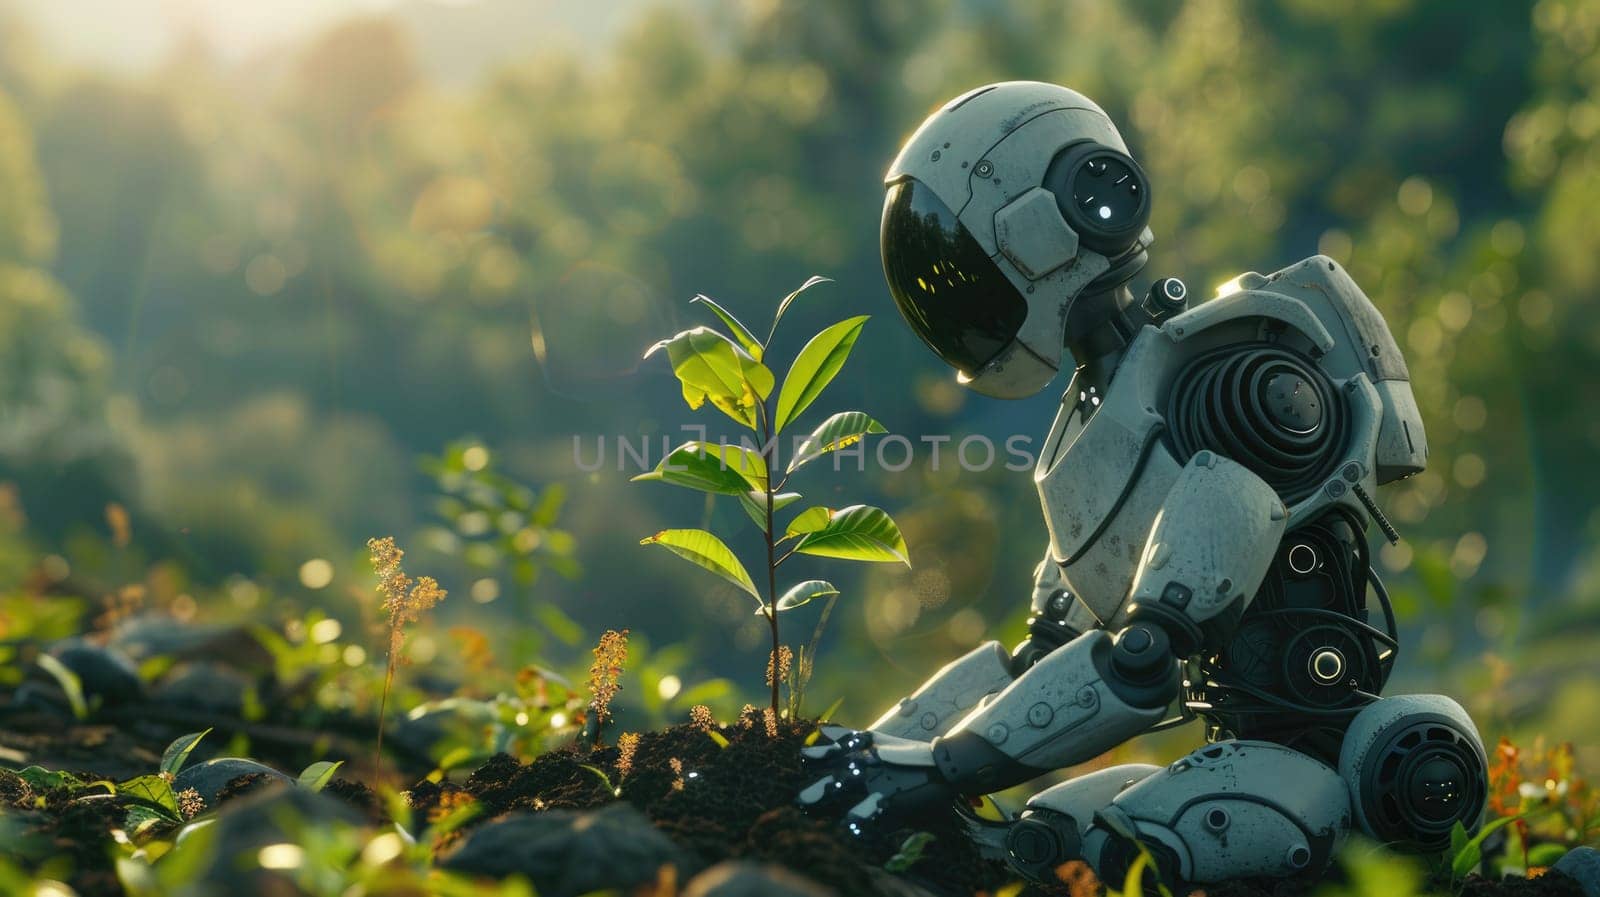 A robot planting a tree in a reforestation effort, Surrounded by a natural landscape, Futuristic preserving and enhancing the environment.